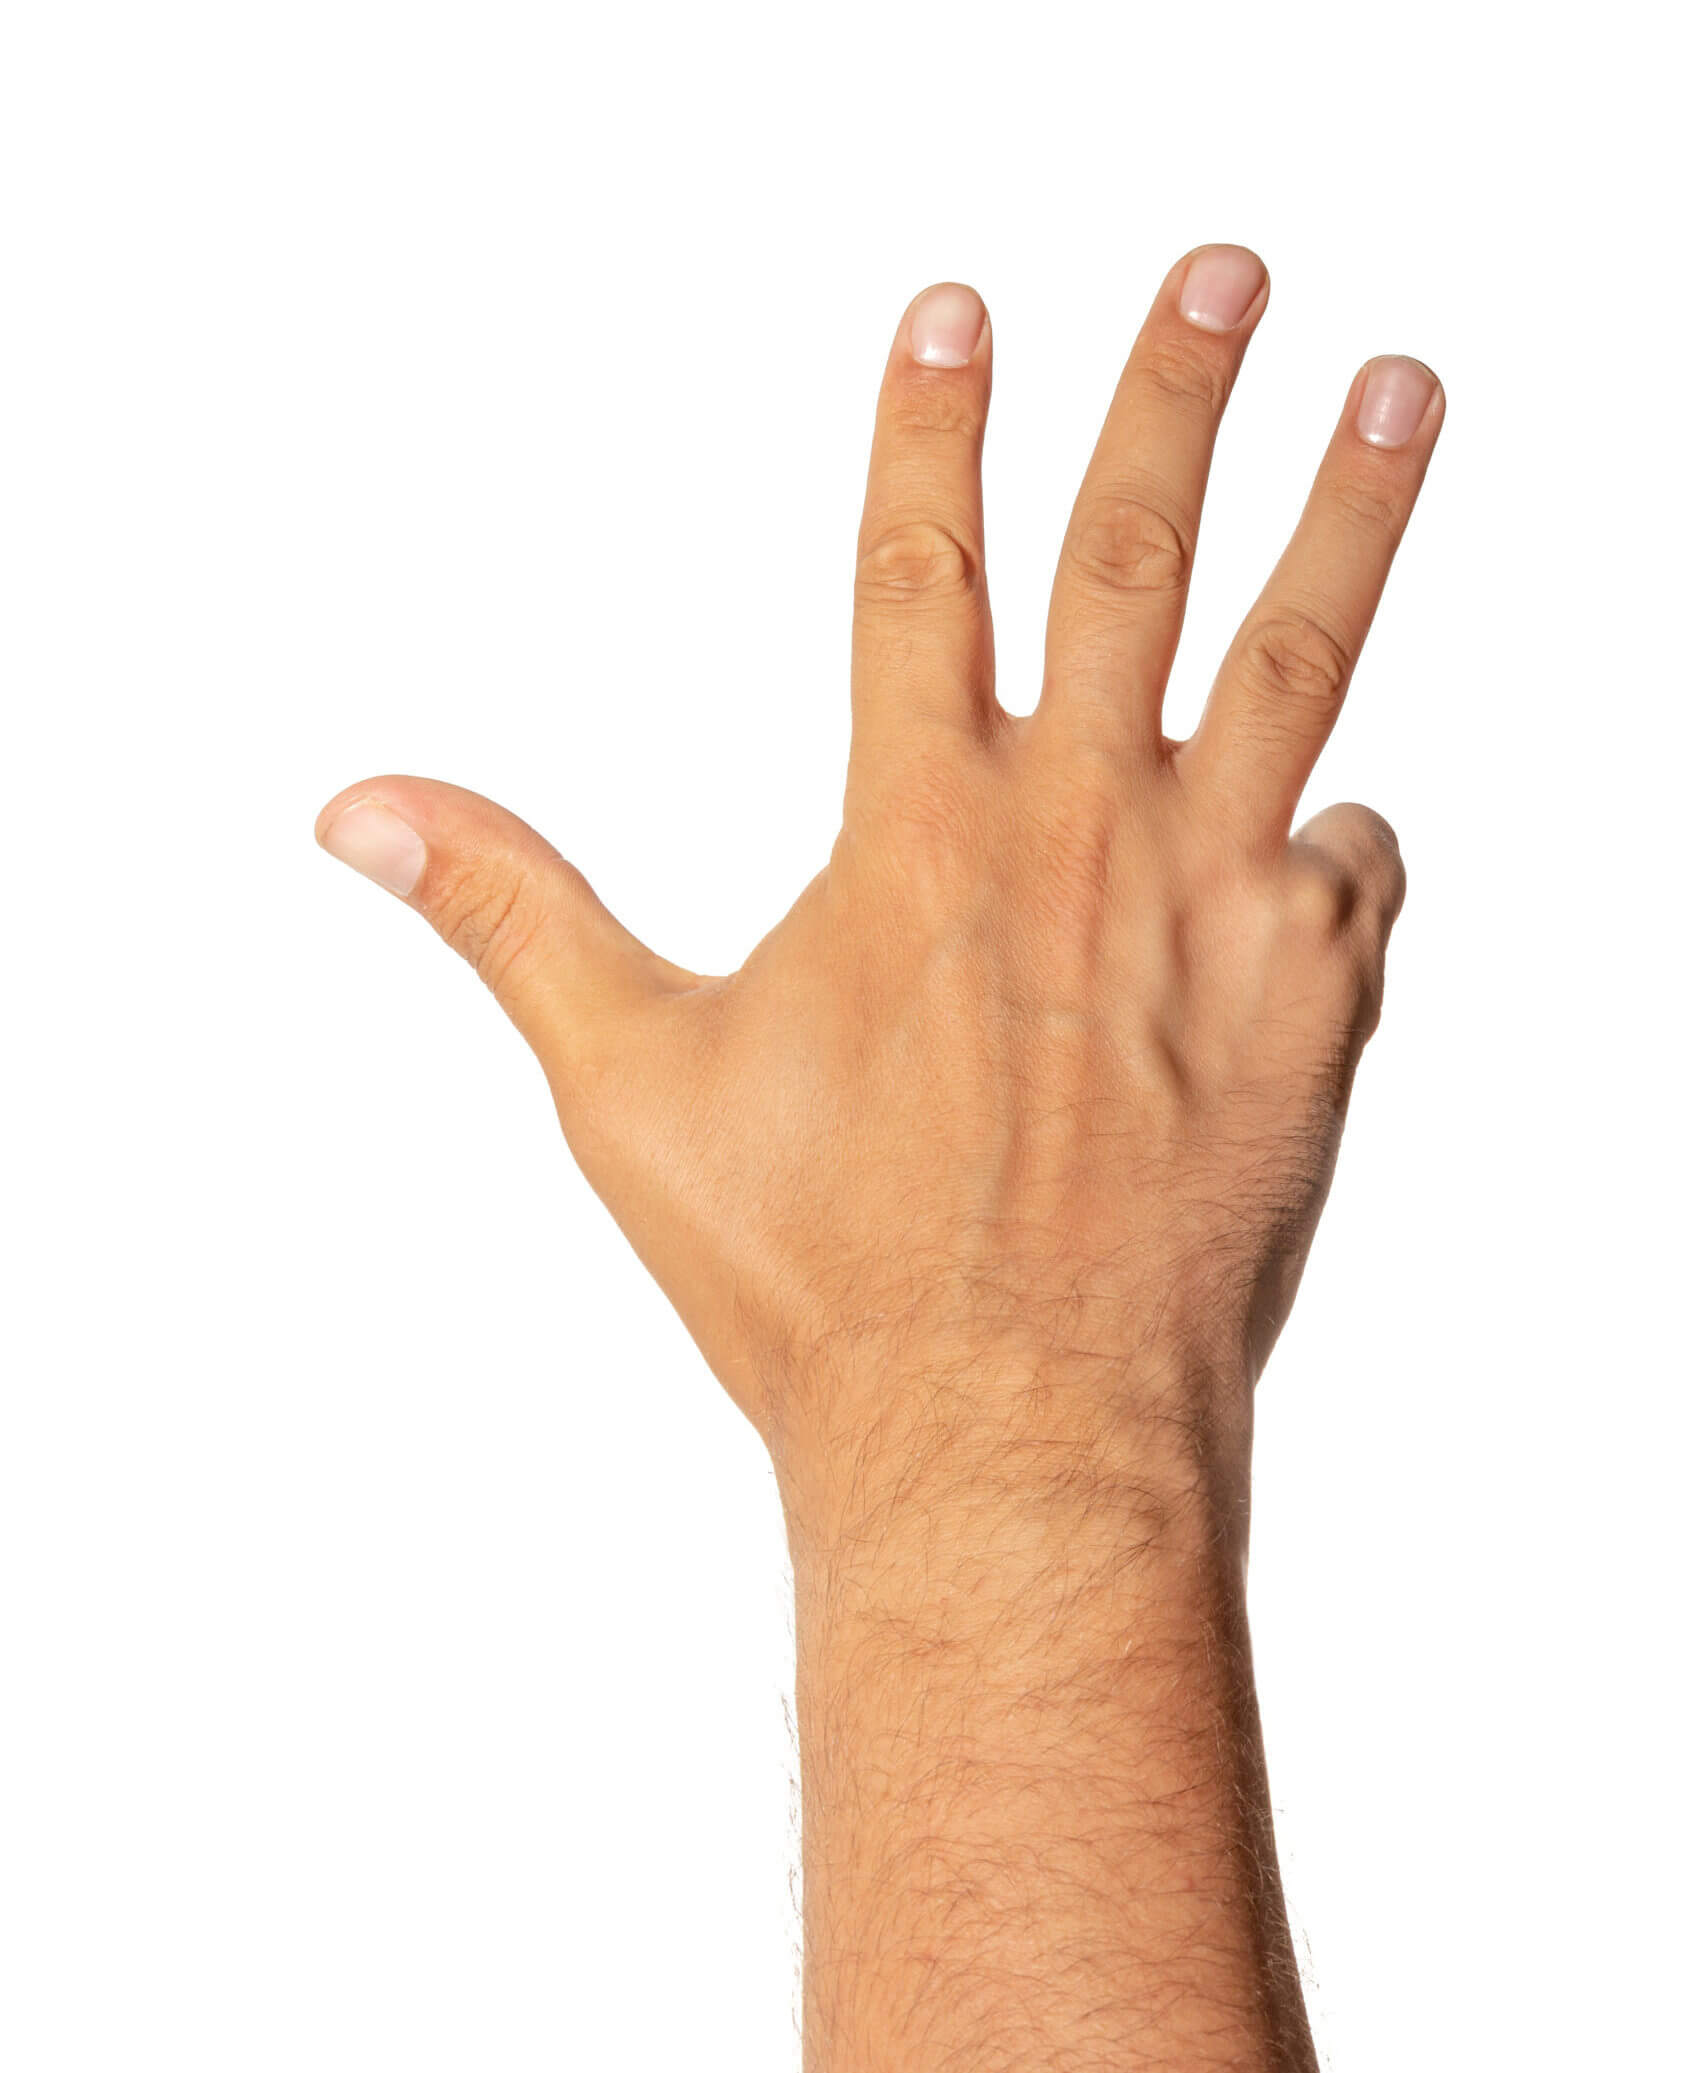 Hand arthritis exercises can help you maintain dexterity in your fingers.